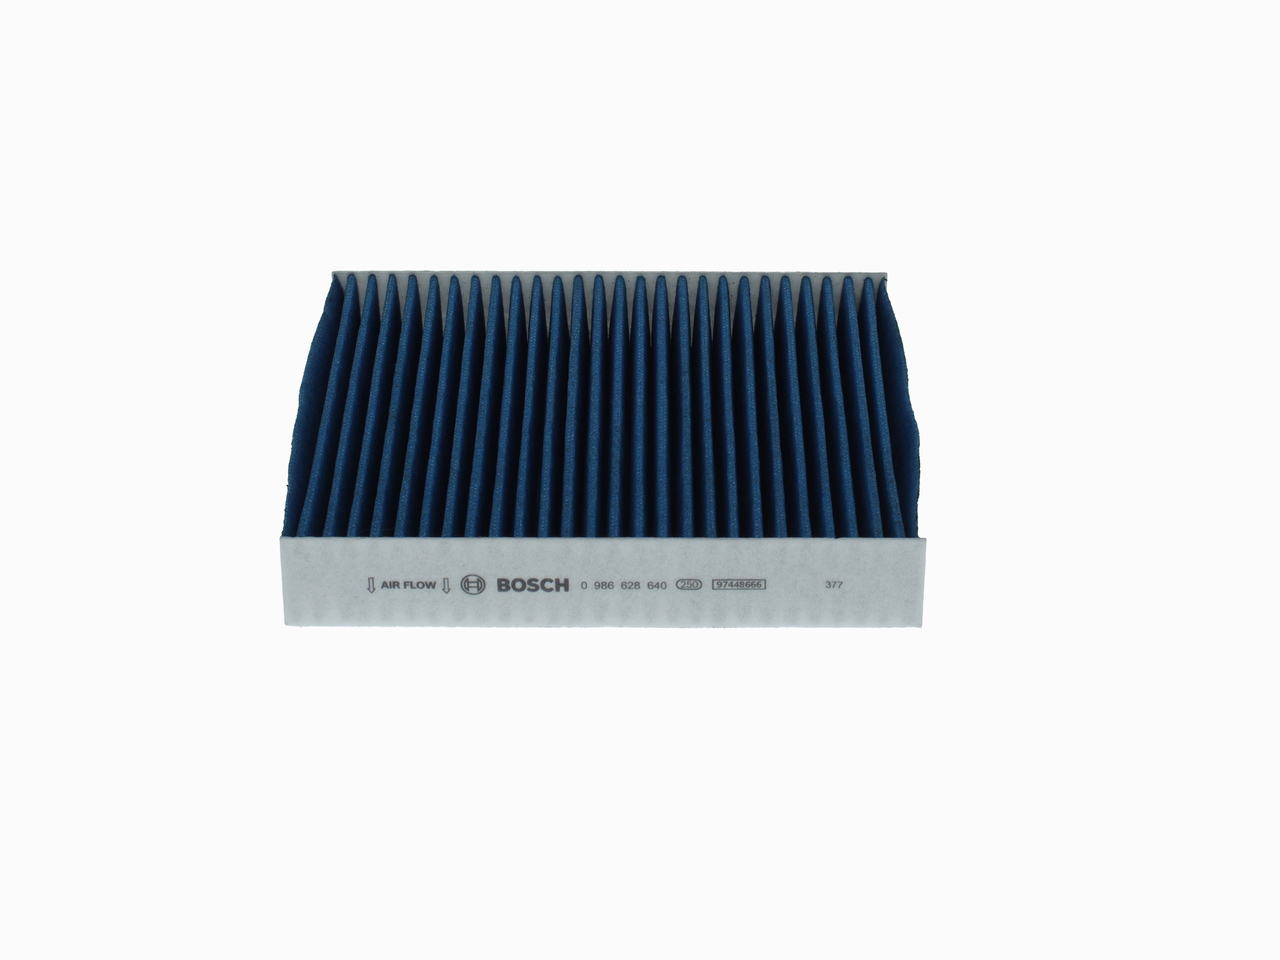 0 986 628 640 BOSCH Pollen filter DACIA Activated Carbon Filter, with antibacterial action, Particle Separation Rate >98% for 2.5µm (fine matter), with anti-allergic effect, with antiviral effect, with fungicidal effect, 216 mm x 200 mm x 35 mm